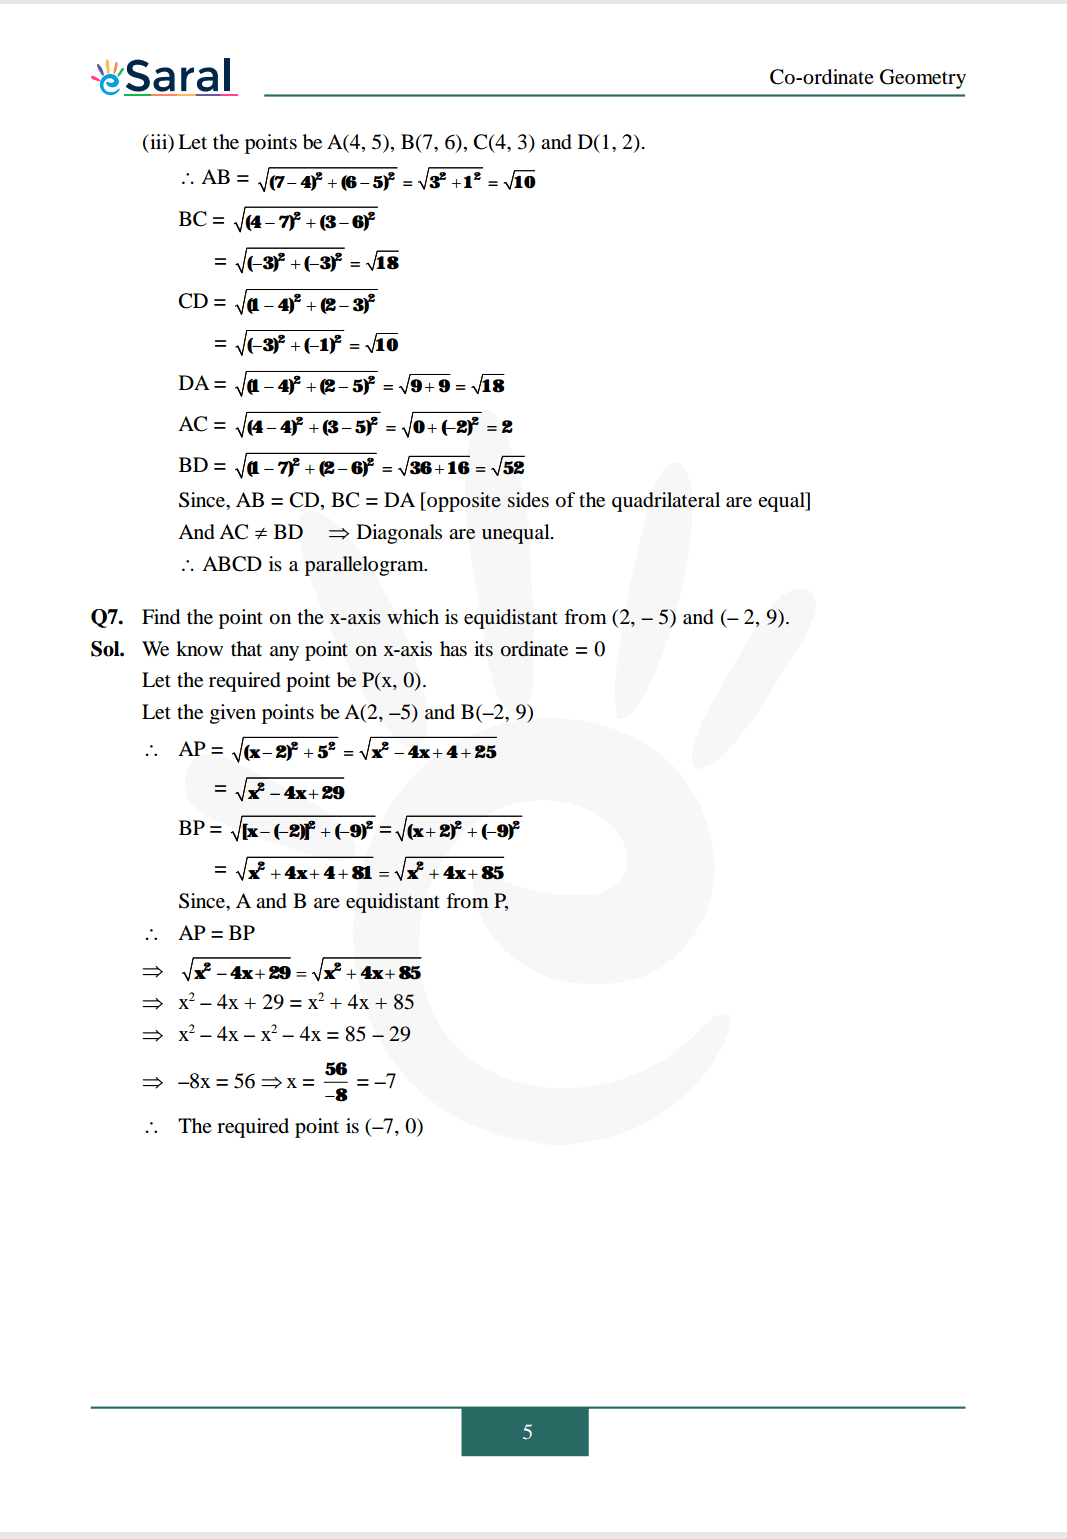 Class 10 Maths Chapter 7 exercise 7.1 solutions Image 5